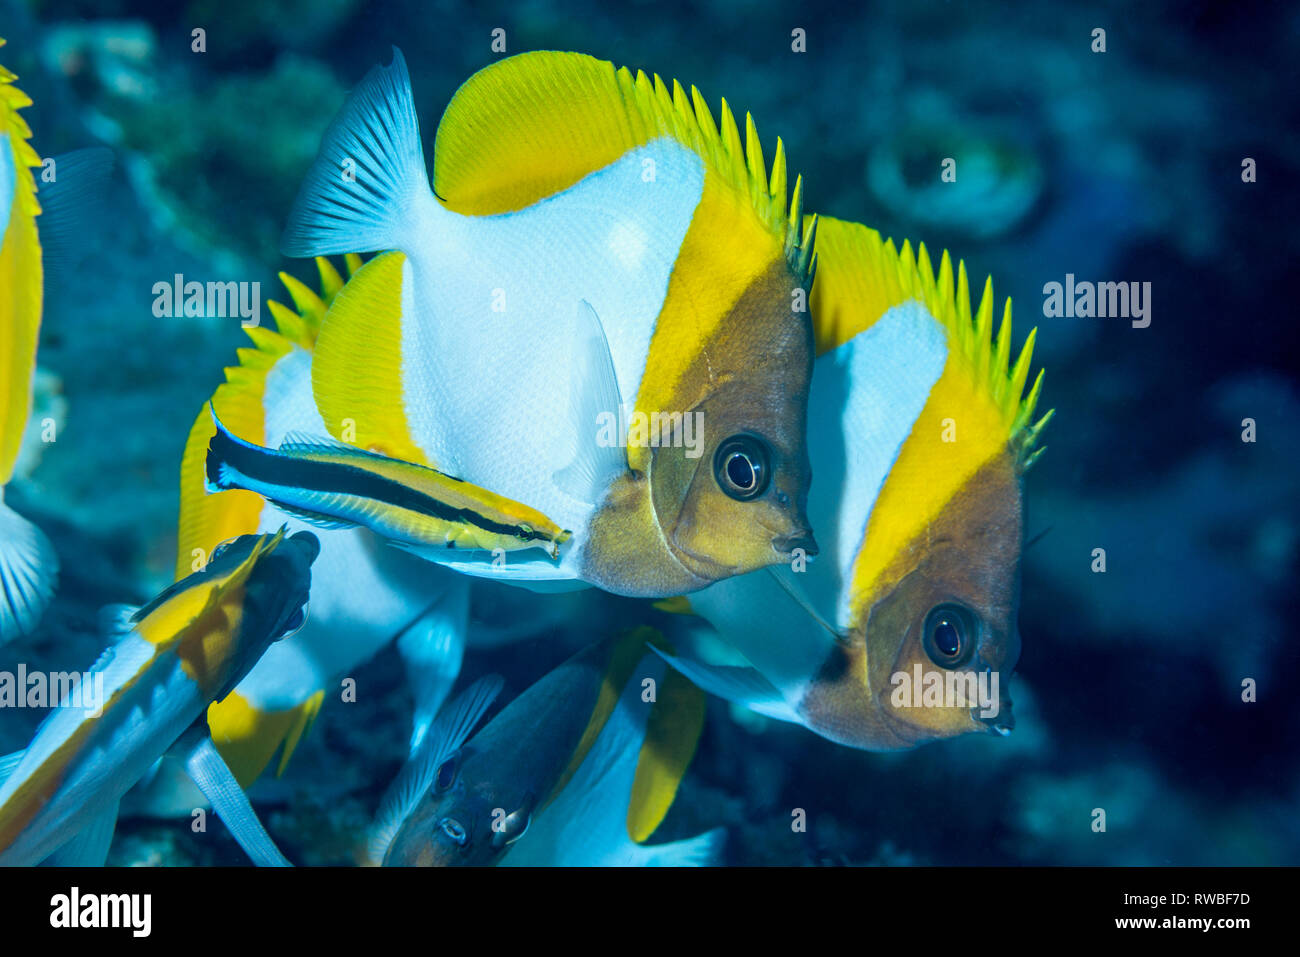 Pyramid butterflyfish [Hemitaurichthys polylepis} with a cleaner wrasse.  North Sulawesi, Indonesia. Stock Photo